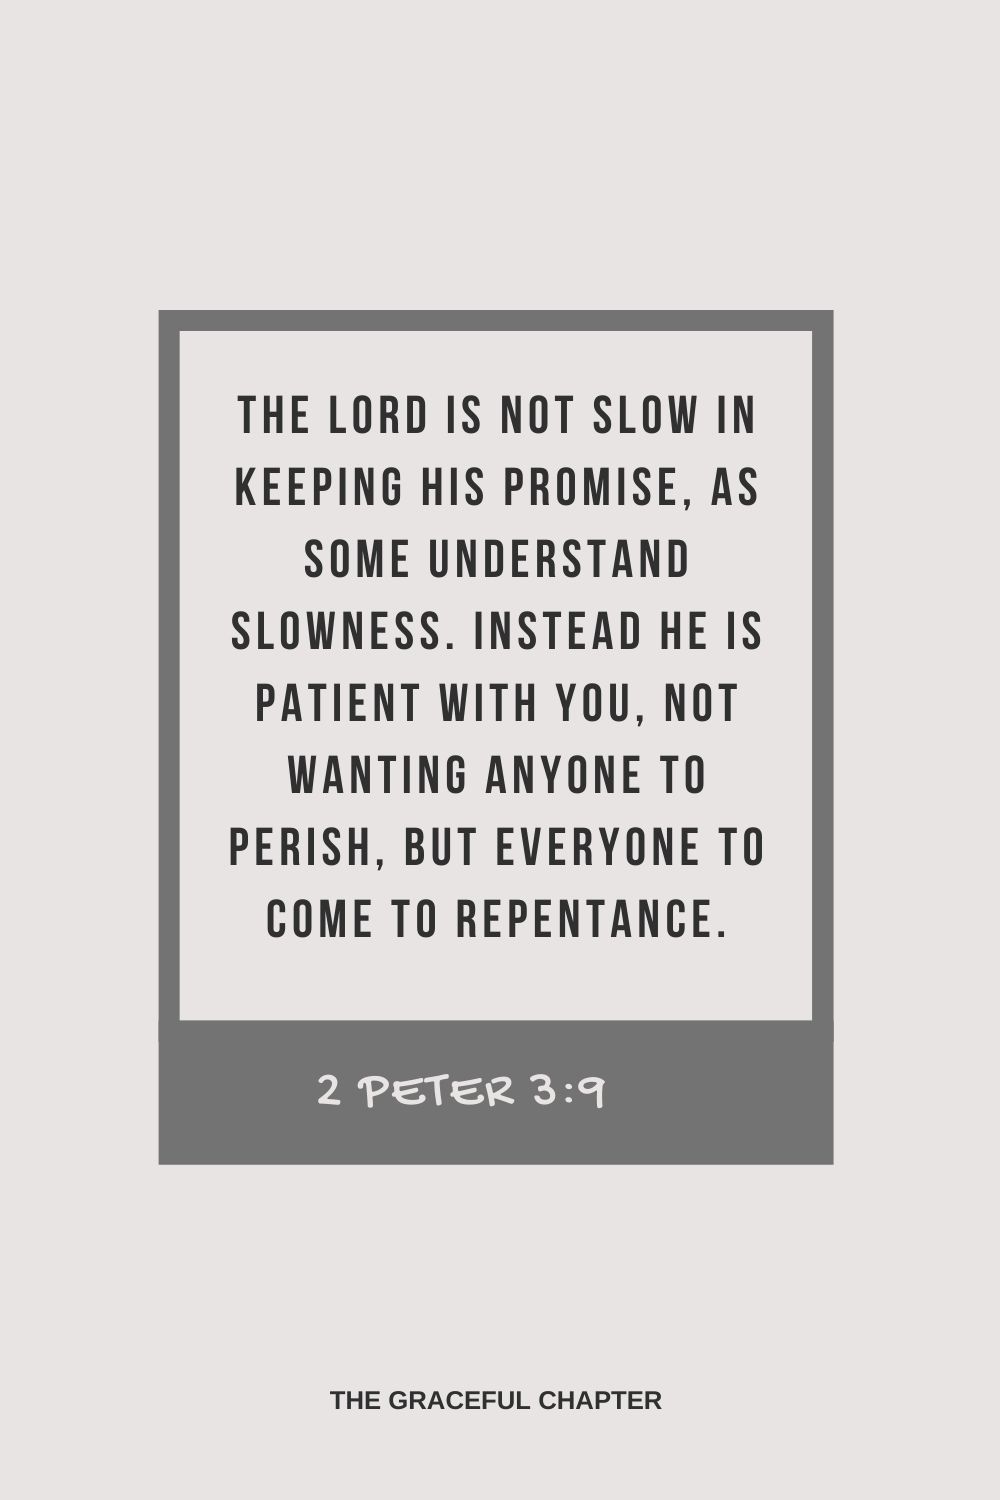 The Lord is not slow in keeping his promise, as some understand slowness. Instead he is patient with you, not wanting anyone to perish, but everyone to come to repentance. 2 Peter 3:9